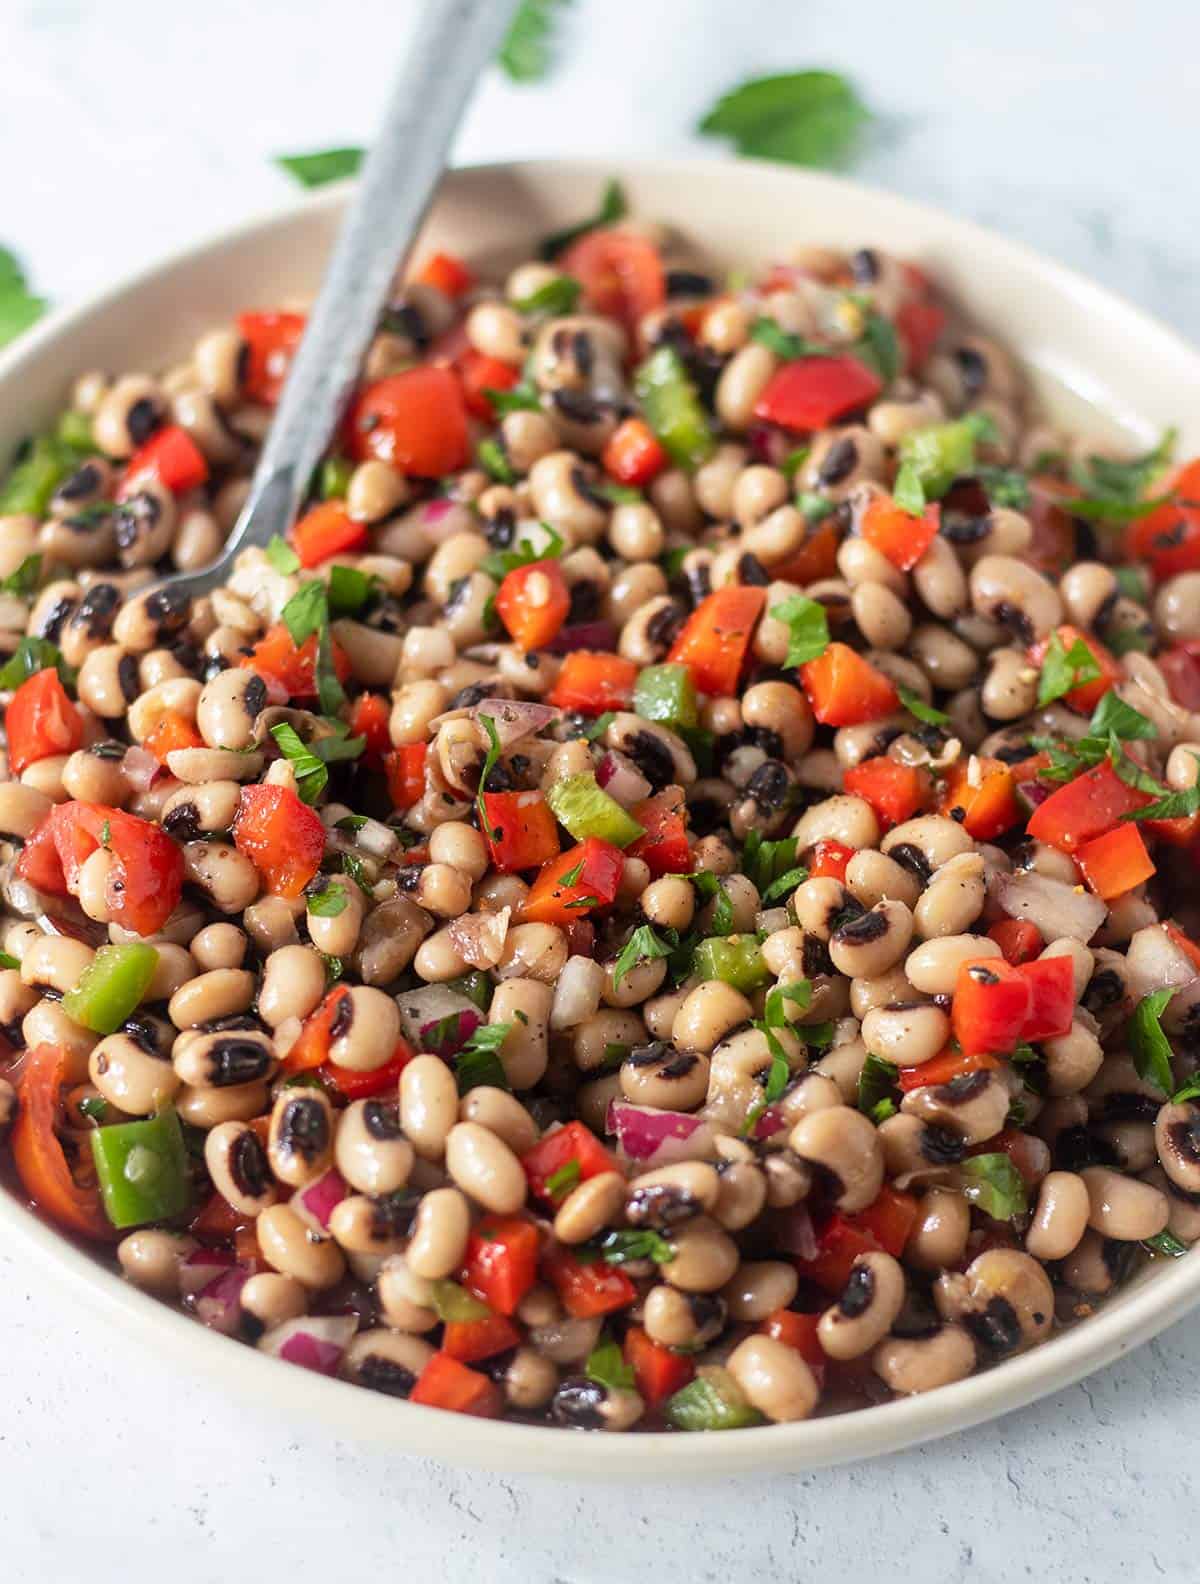 black eyed pea salad in a white salad bowl with a silver serving spoon.